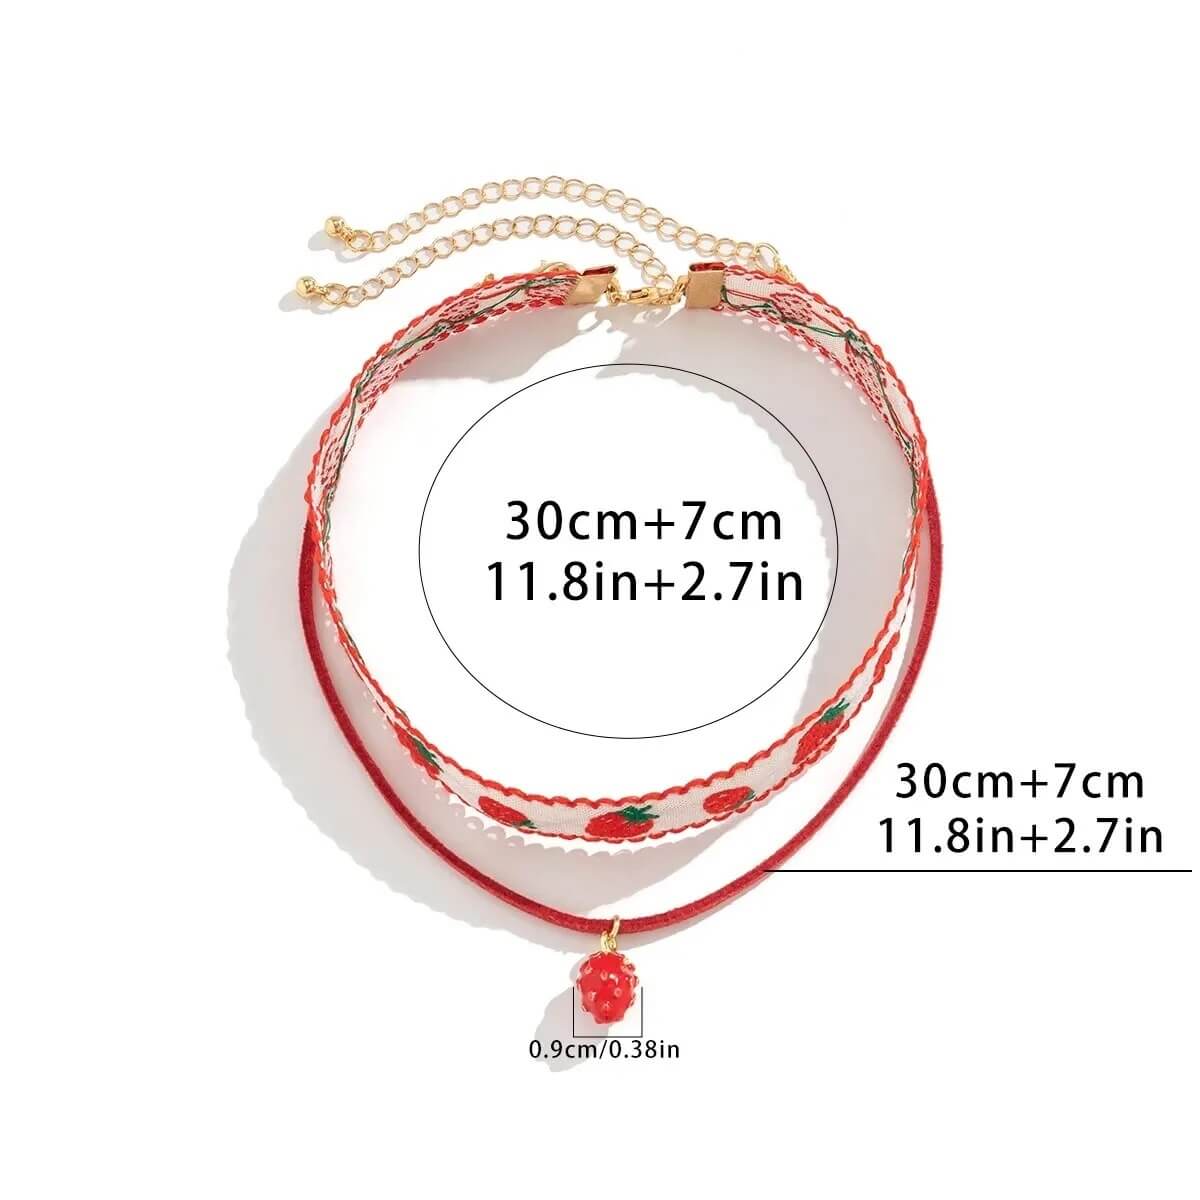 Sweet Strawberry Charm Pendant Necklace Size Info